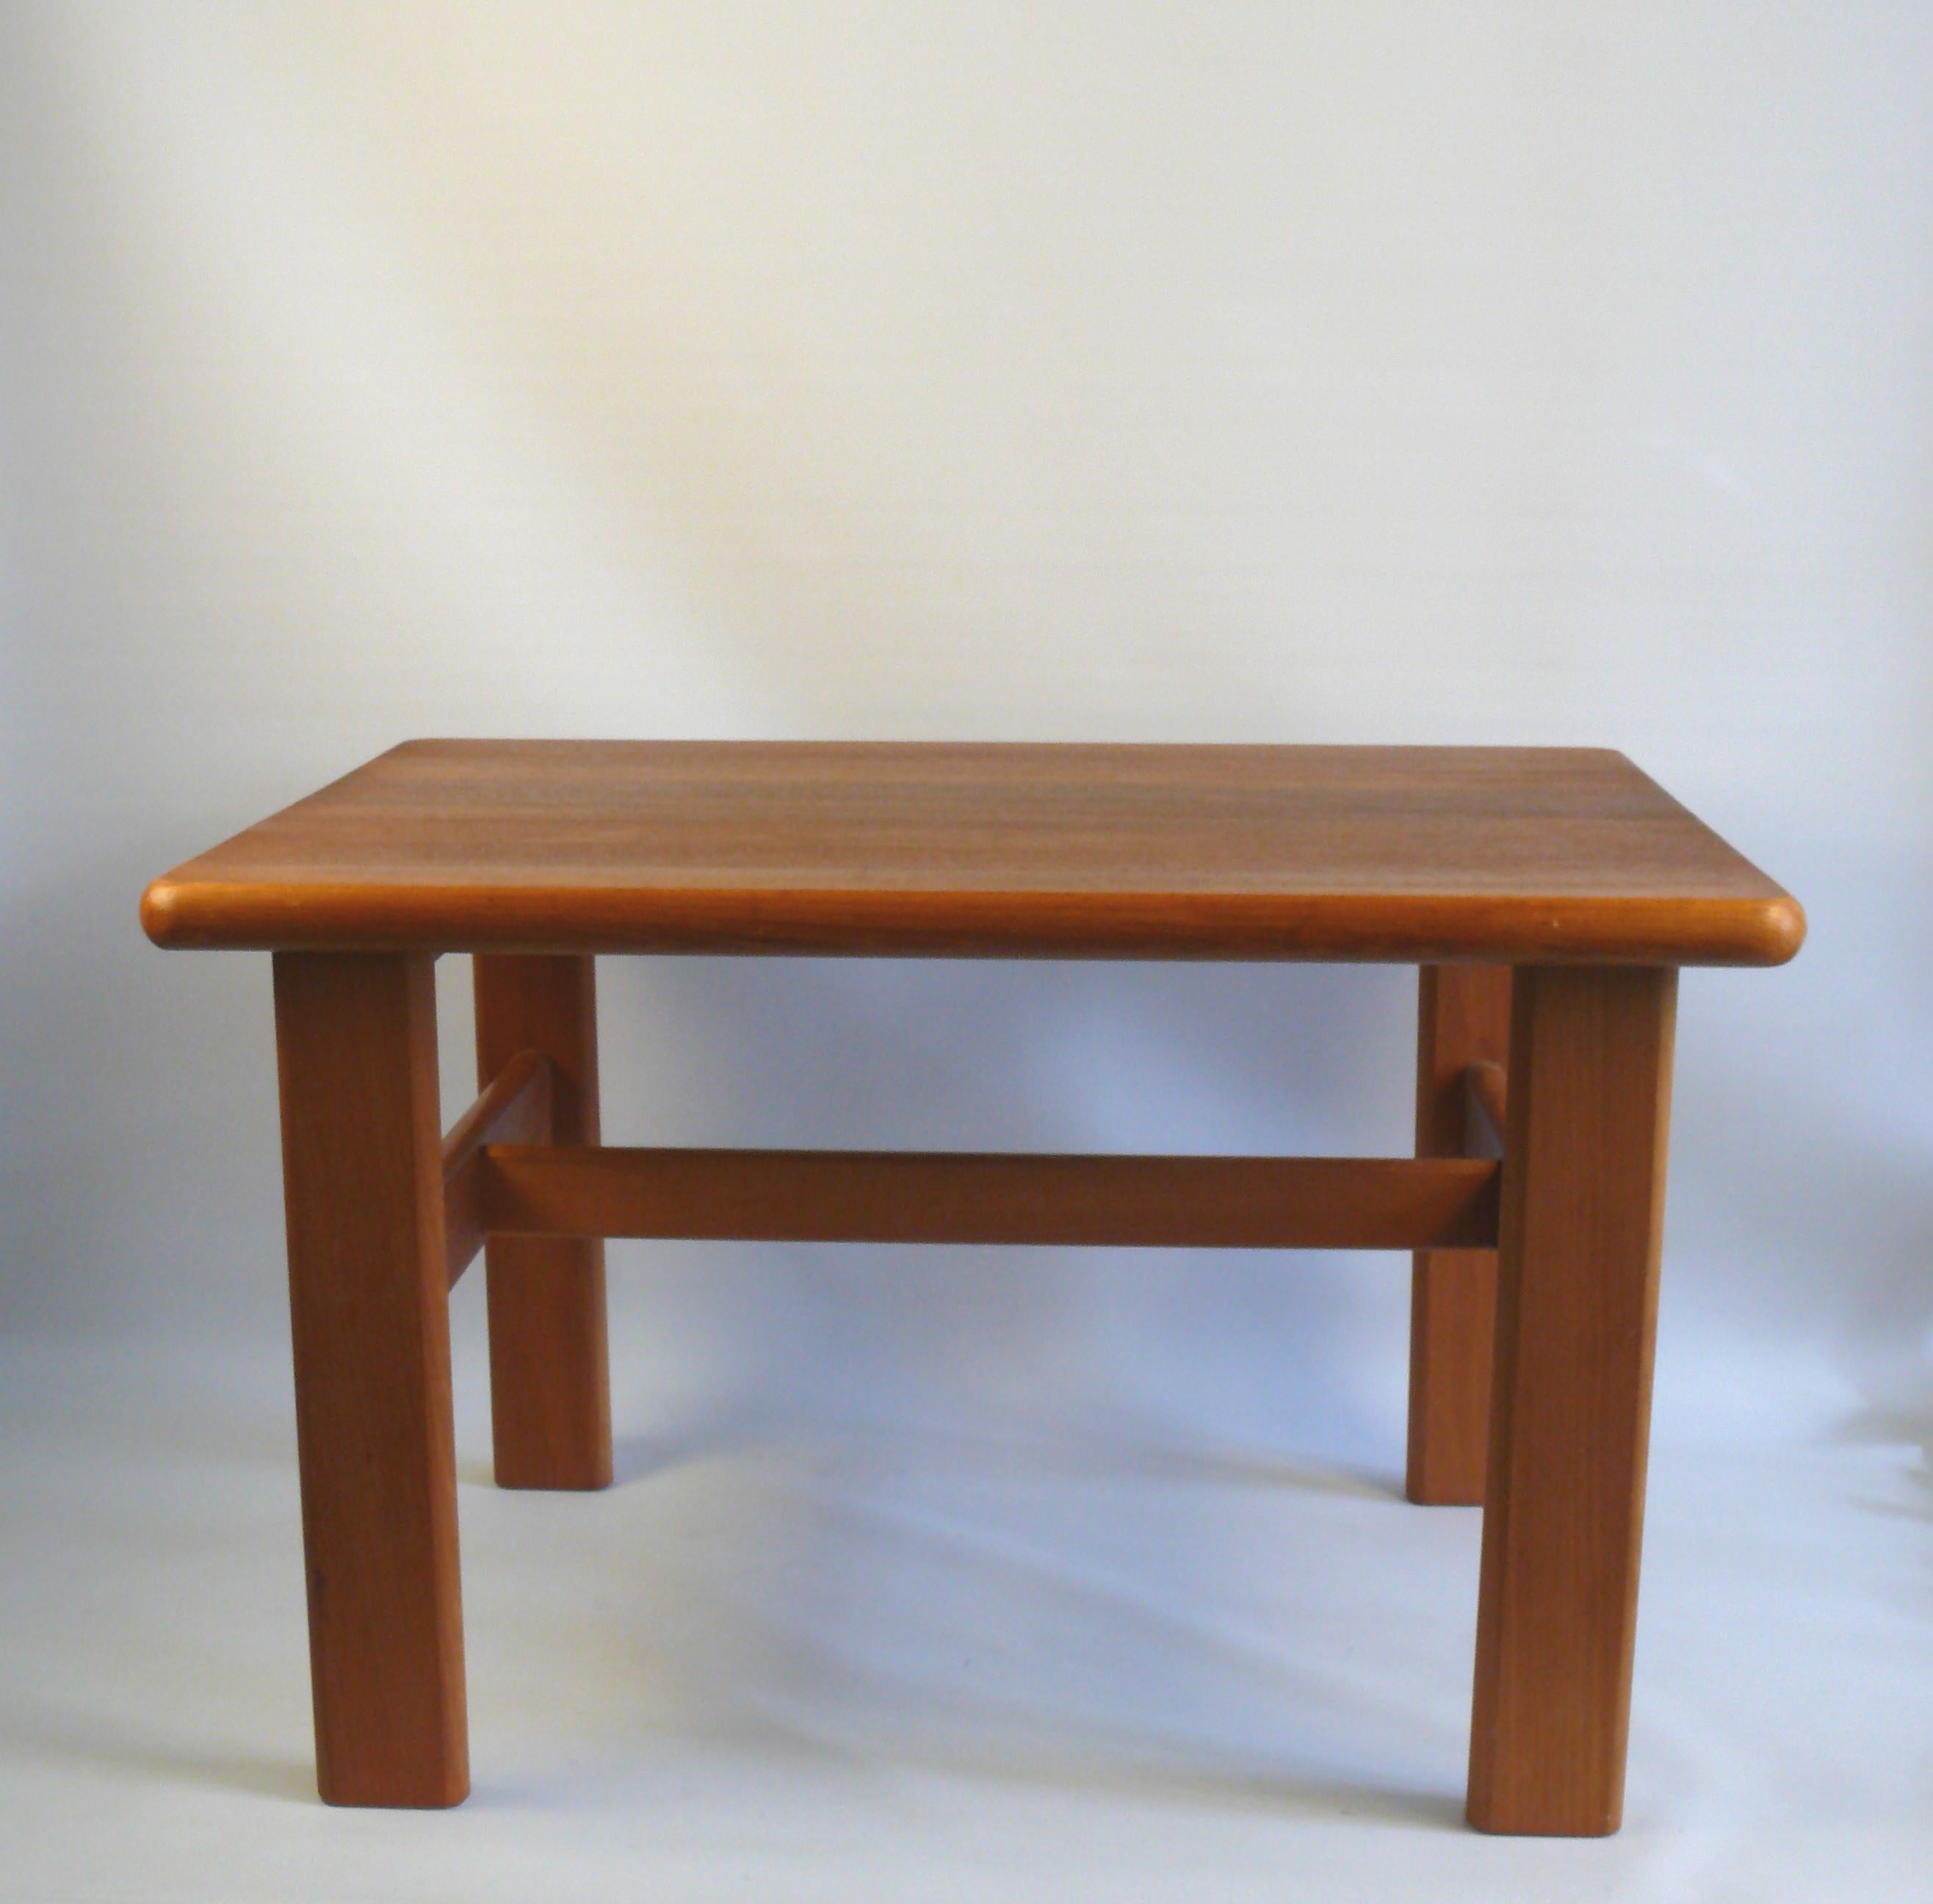 Well-preserved teak side table in Danish design from the 1960s by S. Burchardt-Nielsen, solid and very stable. The top and legs have rounded edges. The surface of the table top is in very good condition, the frame shows usual signs of wear. A wooden